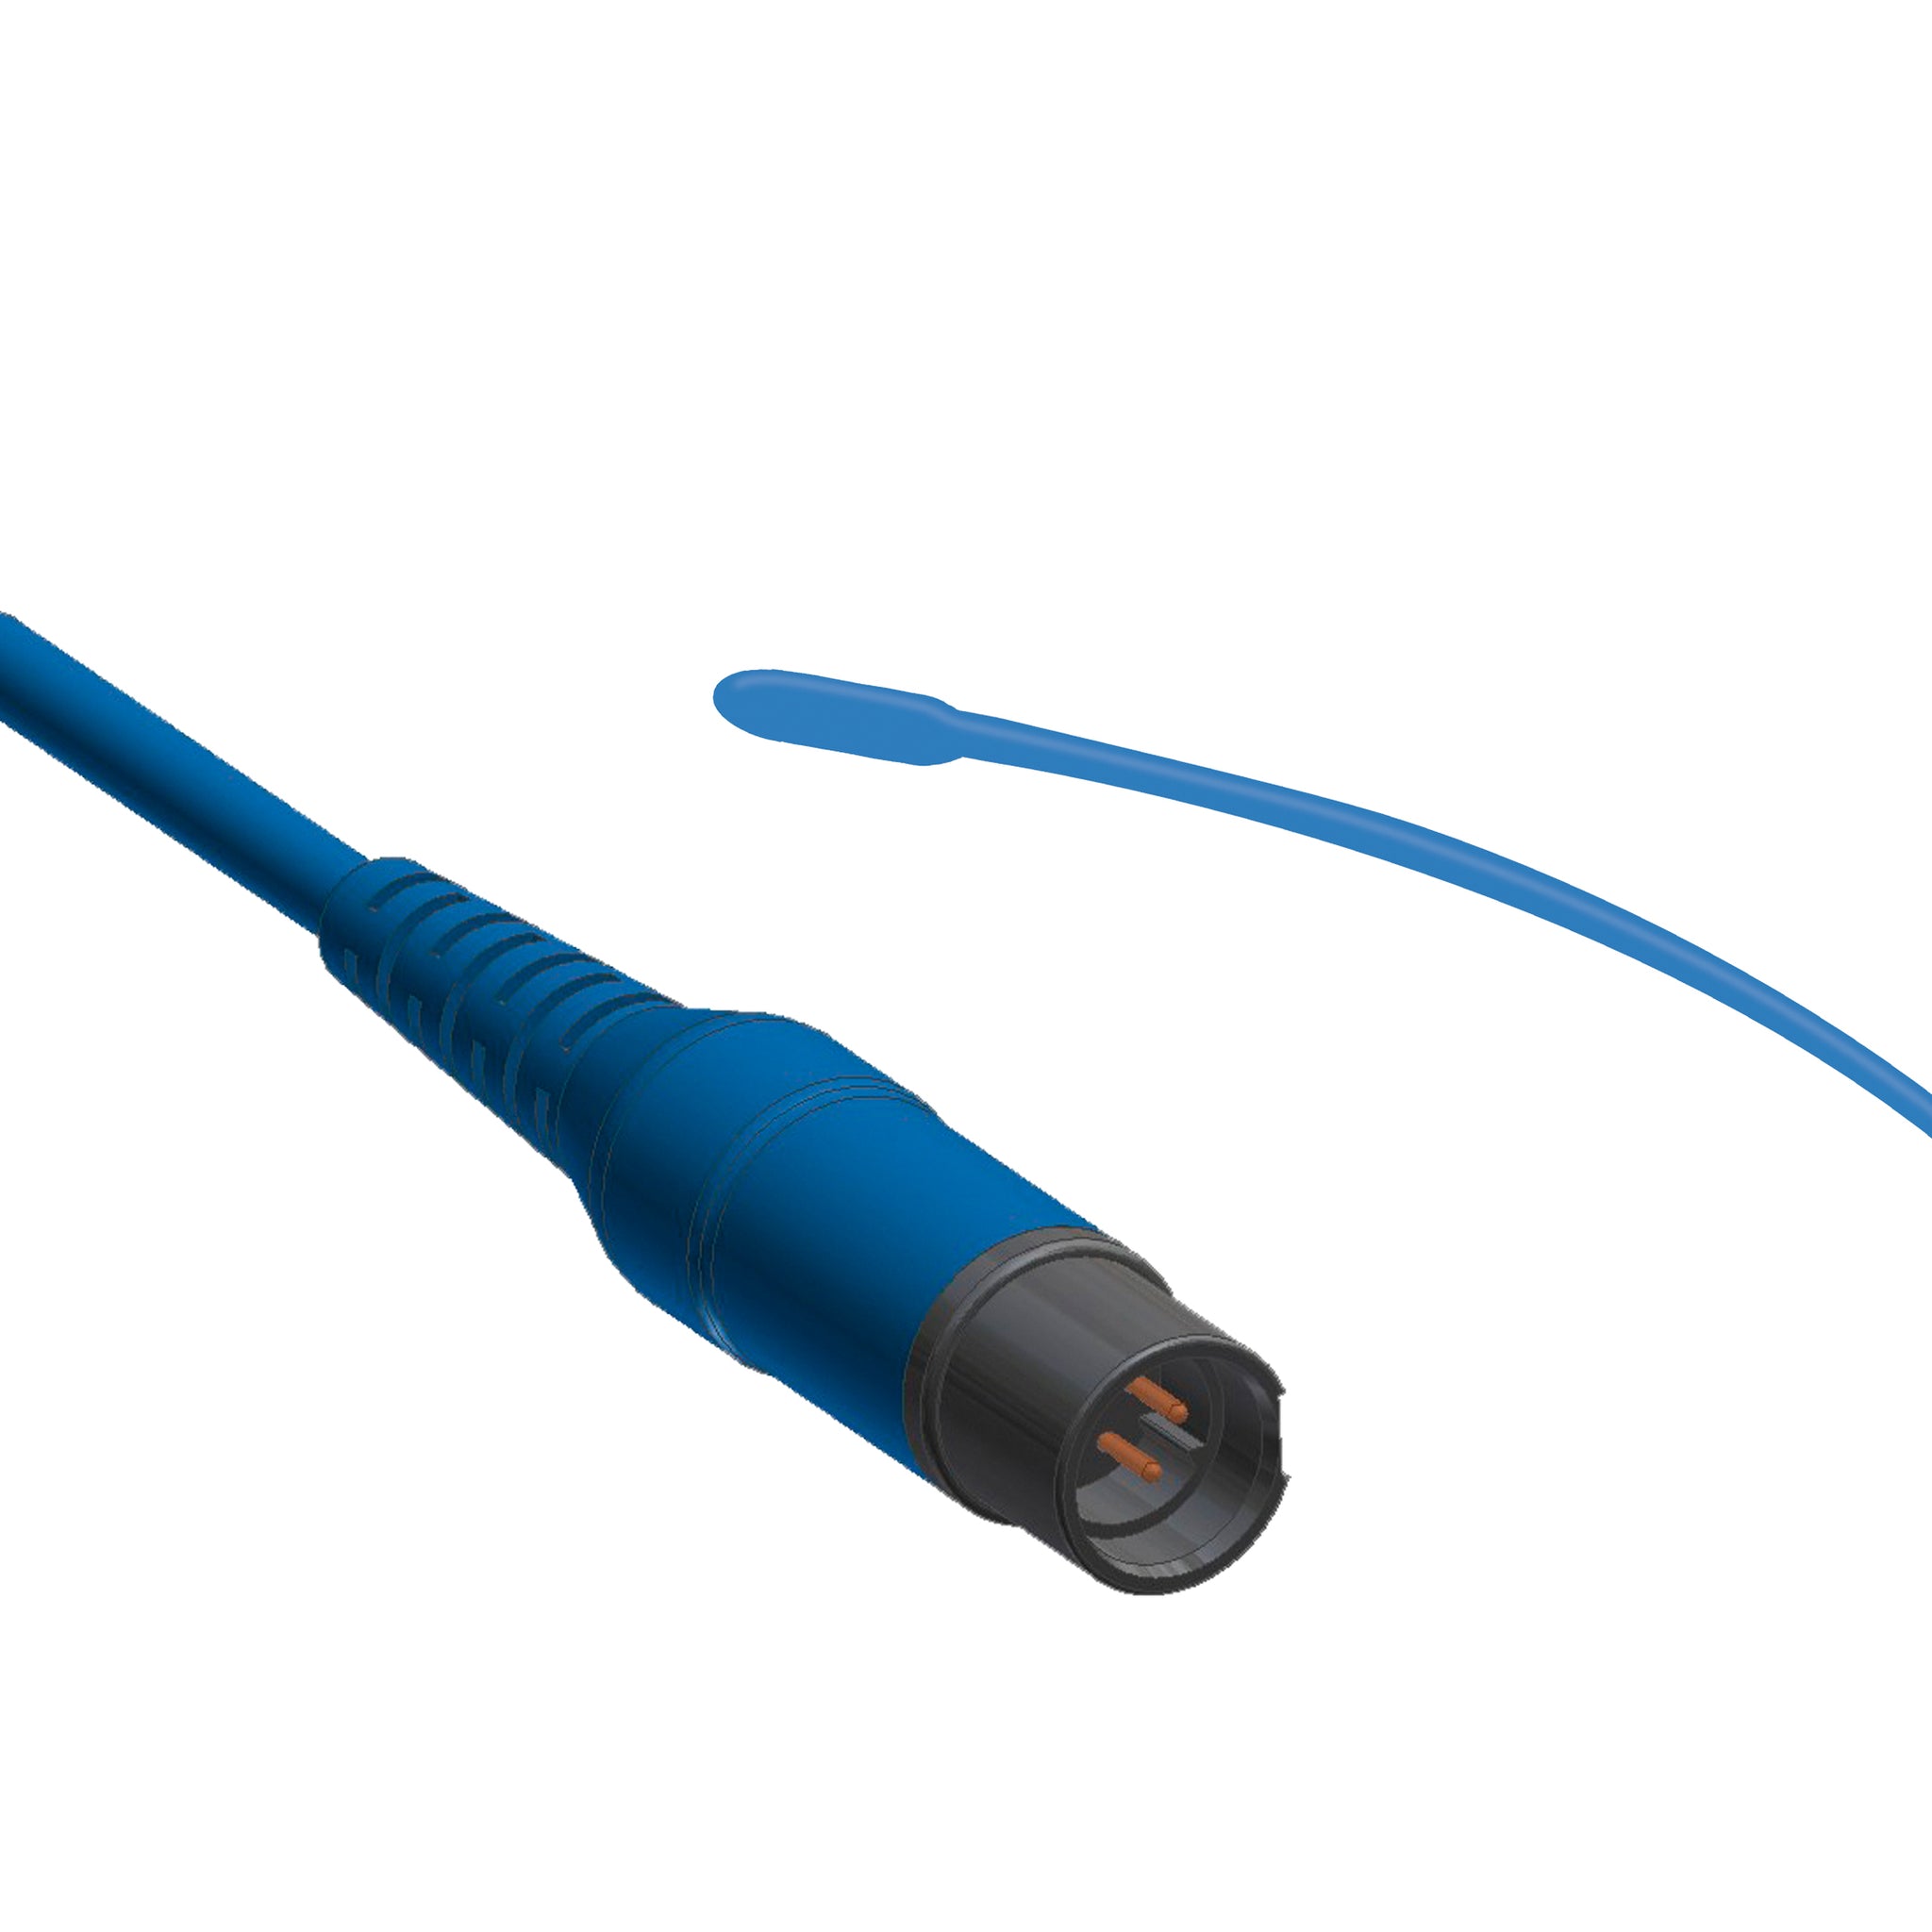 Temperature Probe for Siemens/Draeger - Oesophageal/Rectal - Neonatal